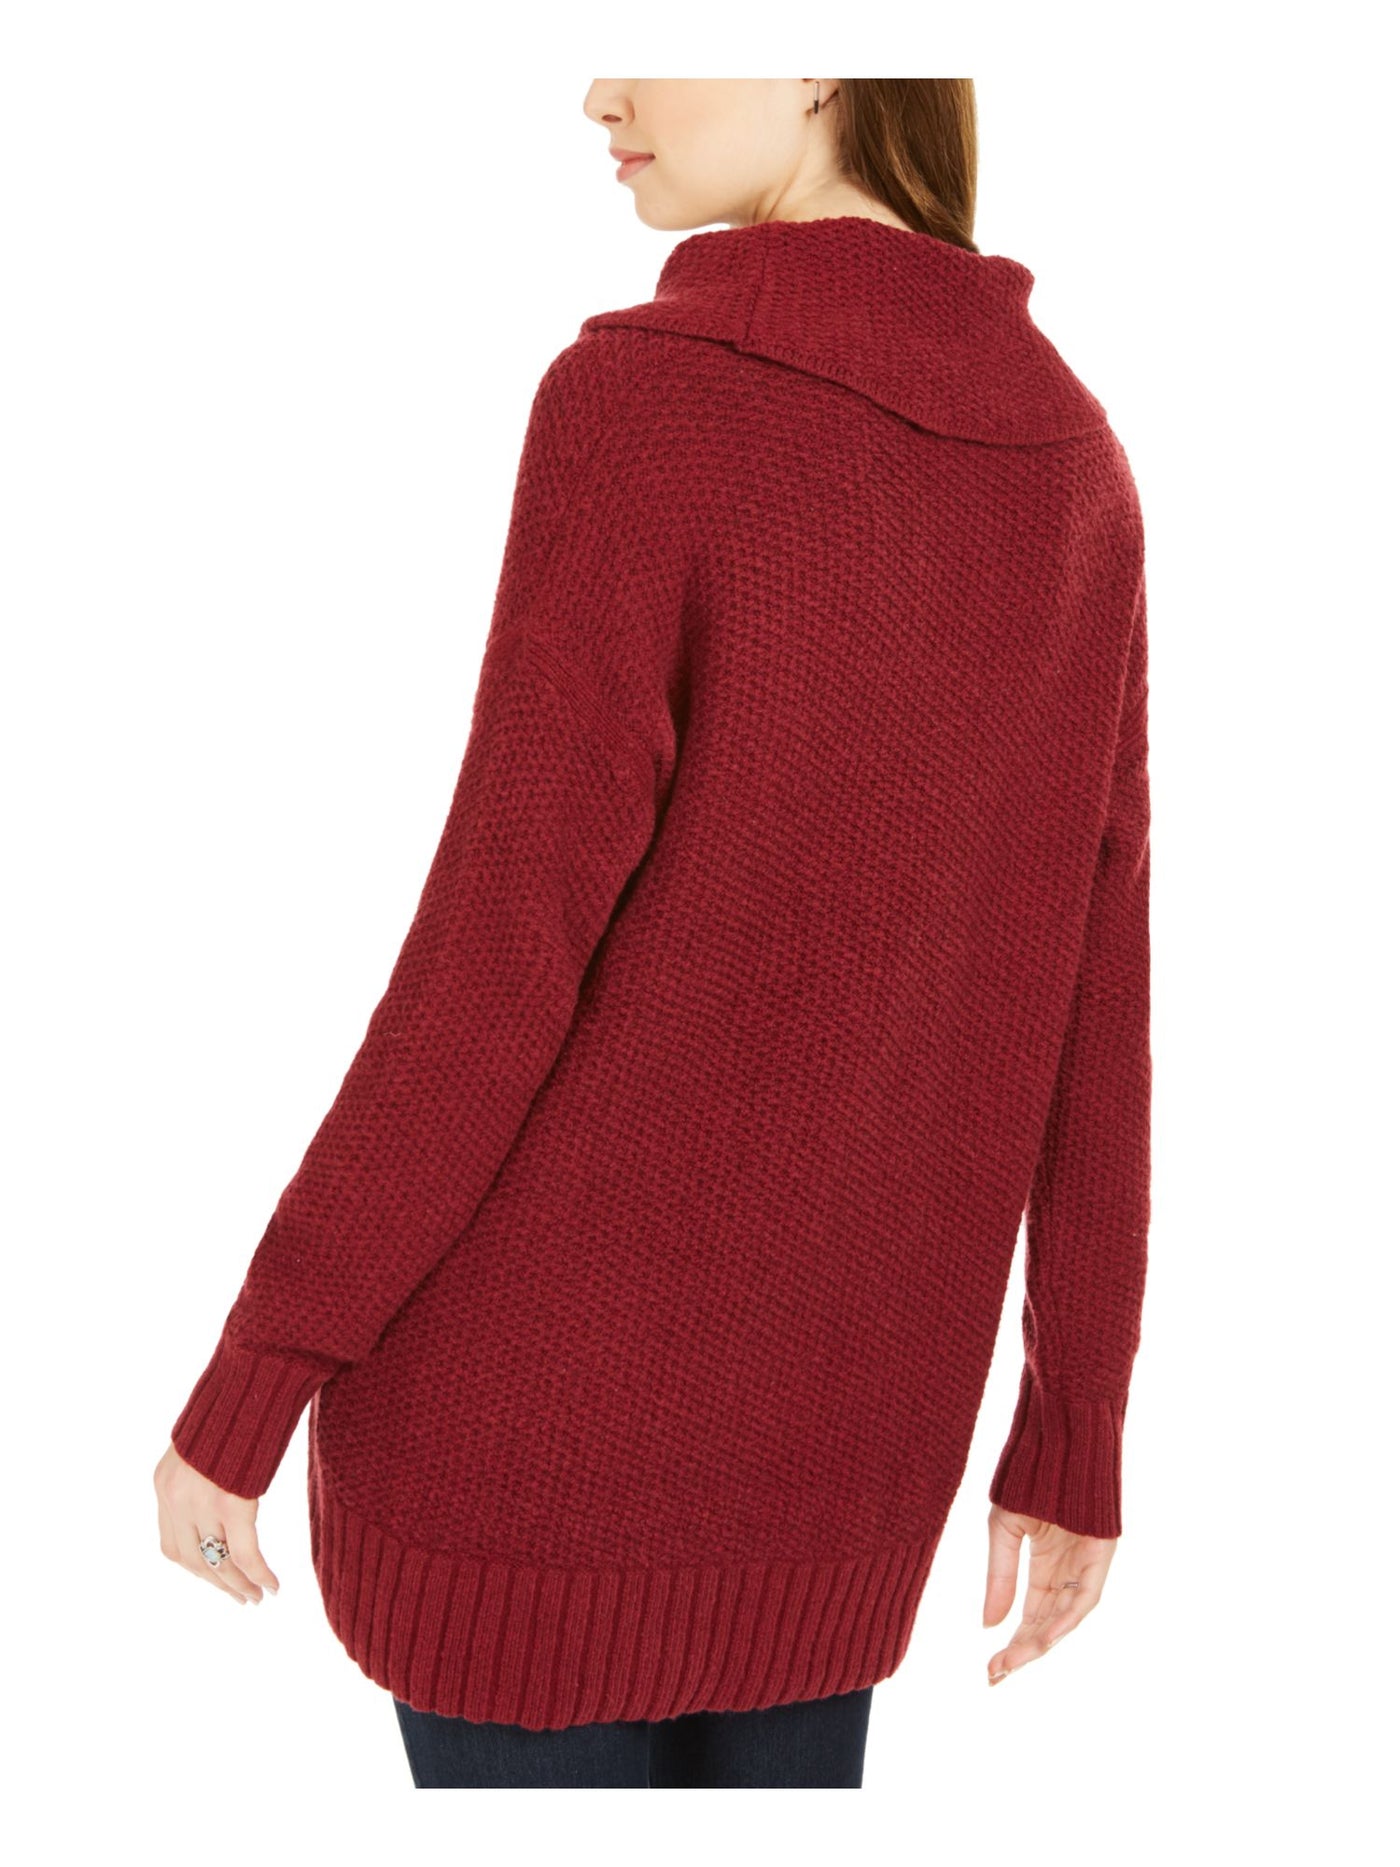 STYLE & COMPANY Womens Red Textured Long Sleeve Cowl Neck Sweater Petites PP